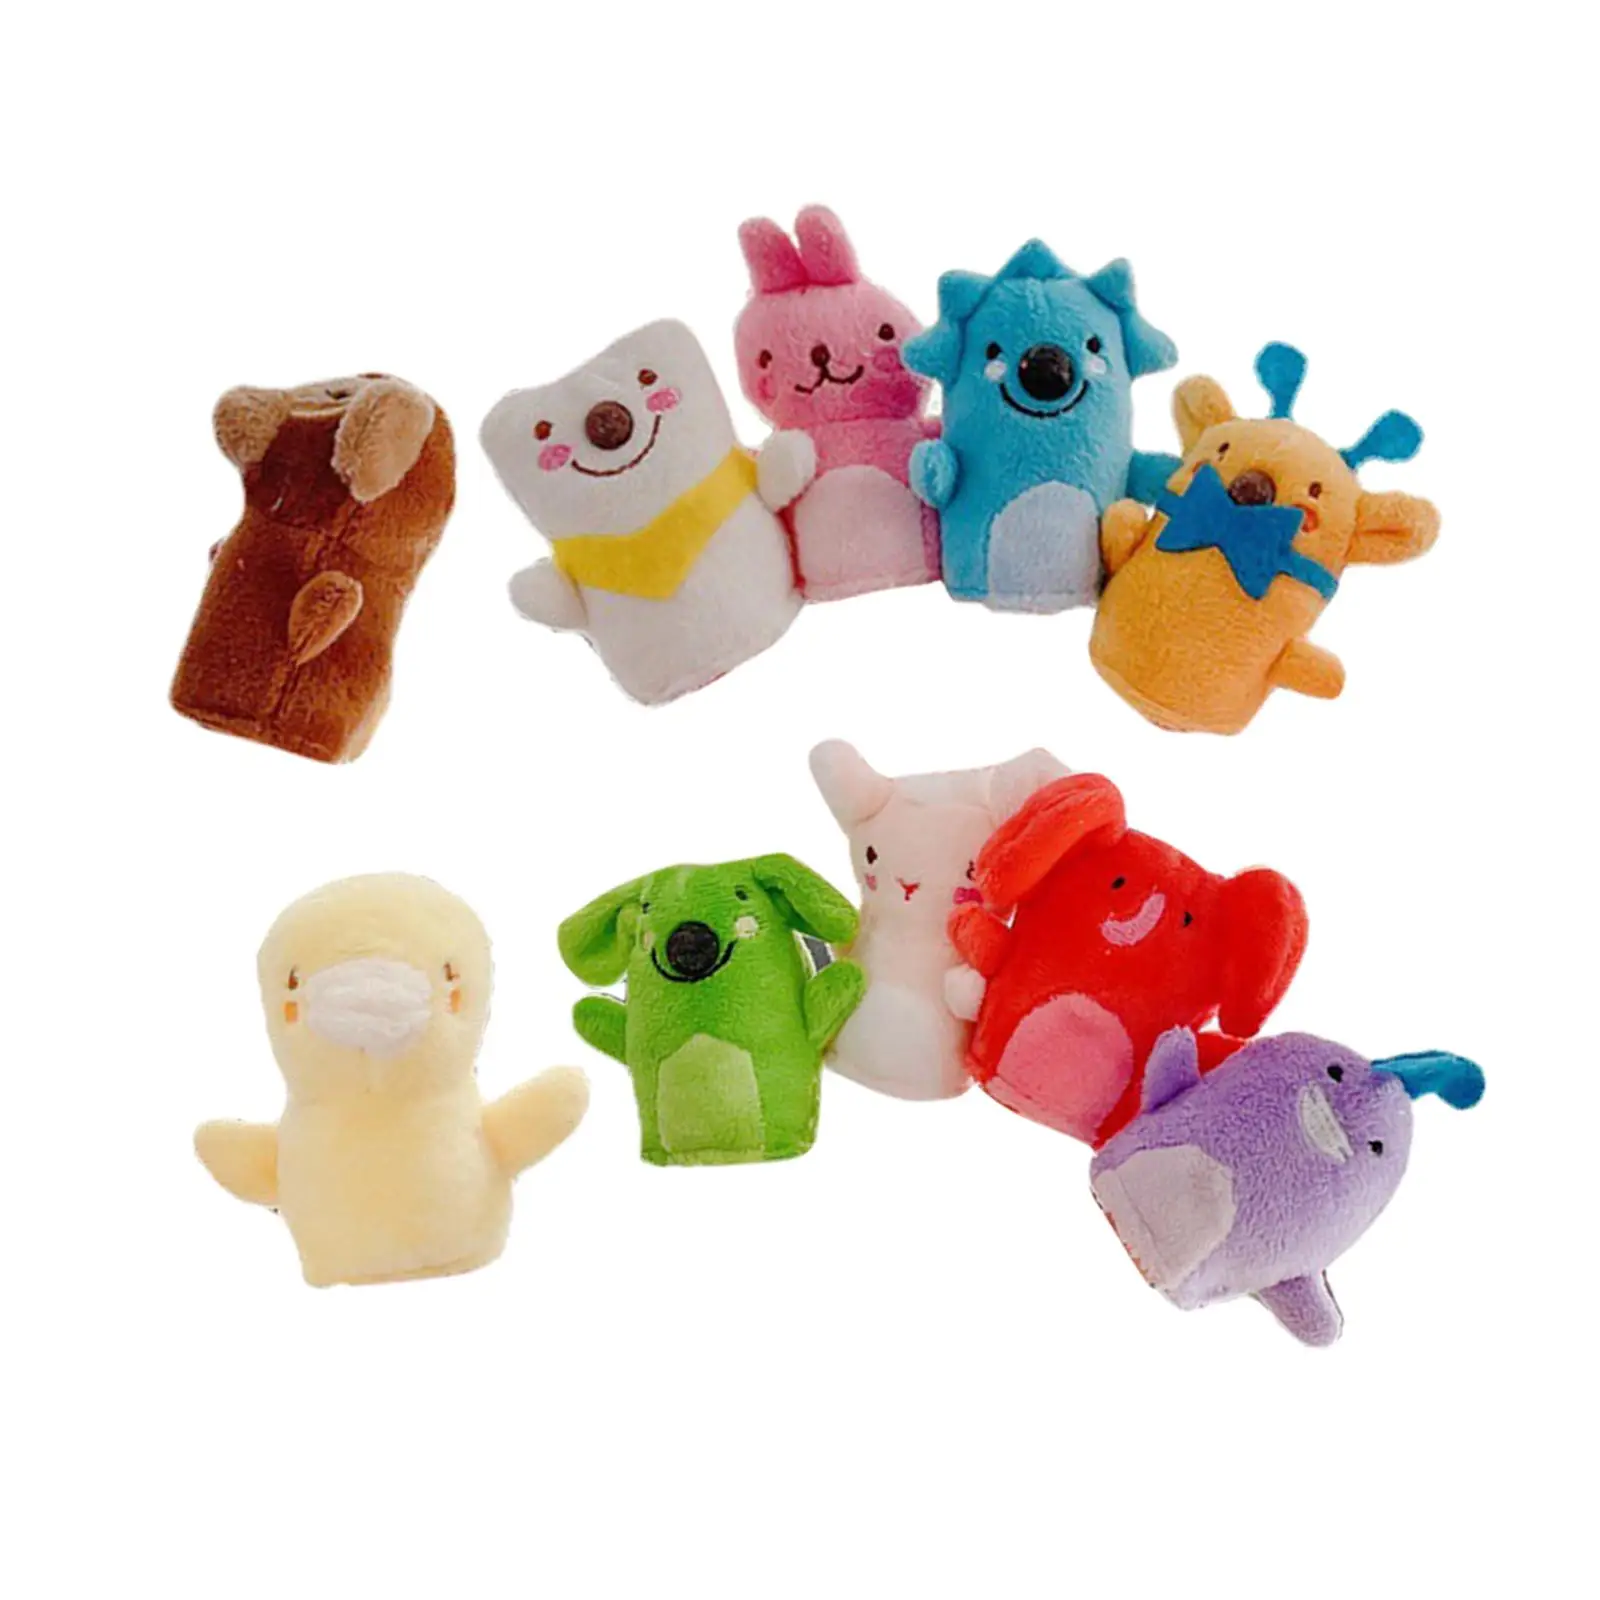 10 Pieces Plush Animals Finger Puppet Toys Baby Story Time Playtime Cute Finger Puppet for Party Favors Gifts Girls Boys Kids